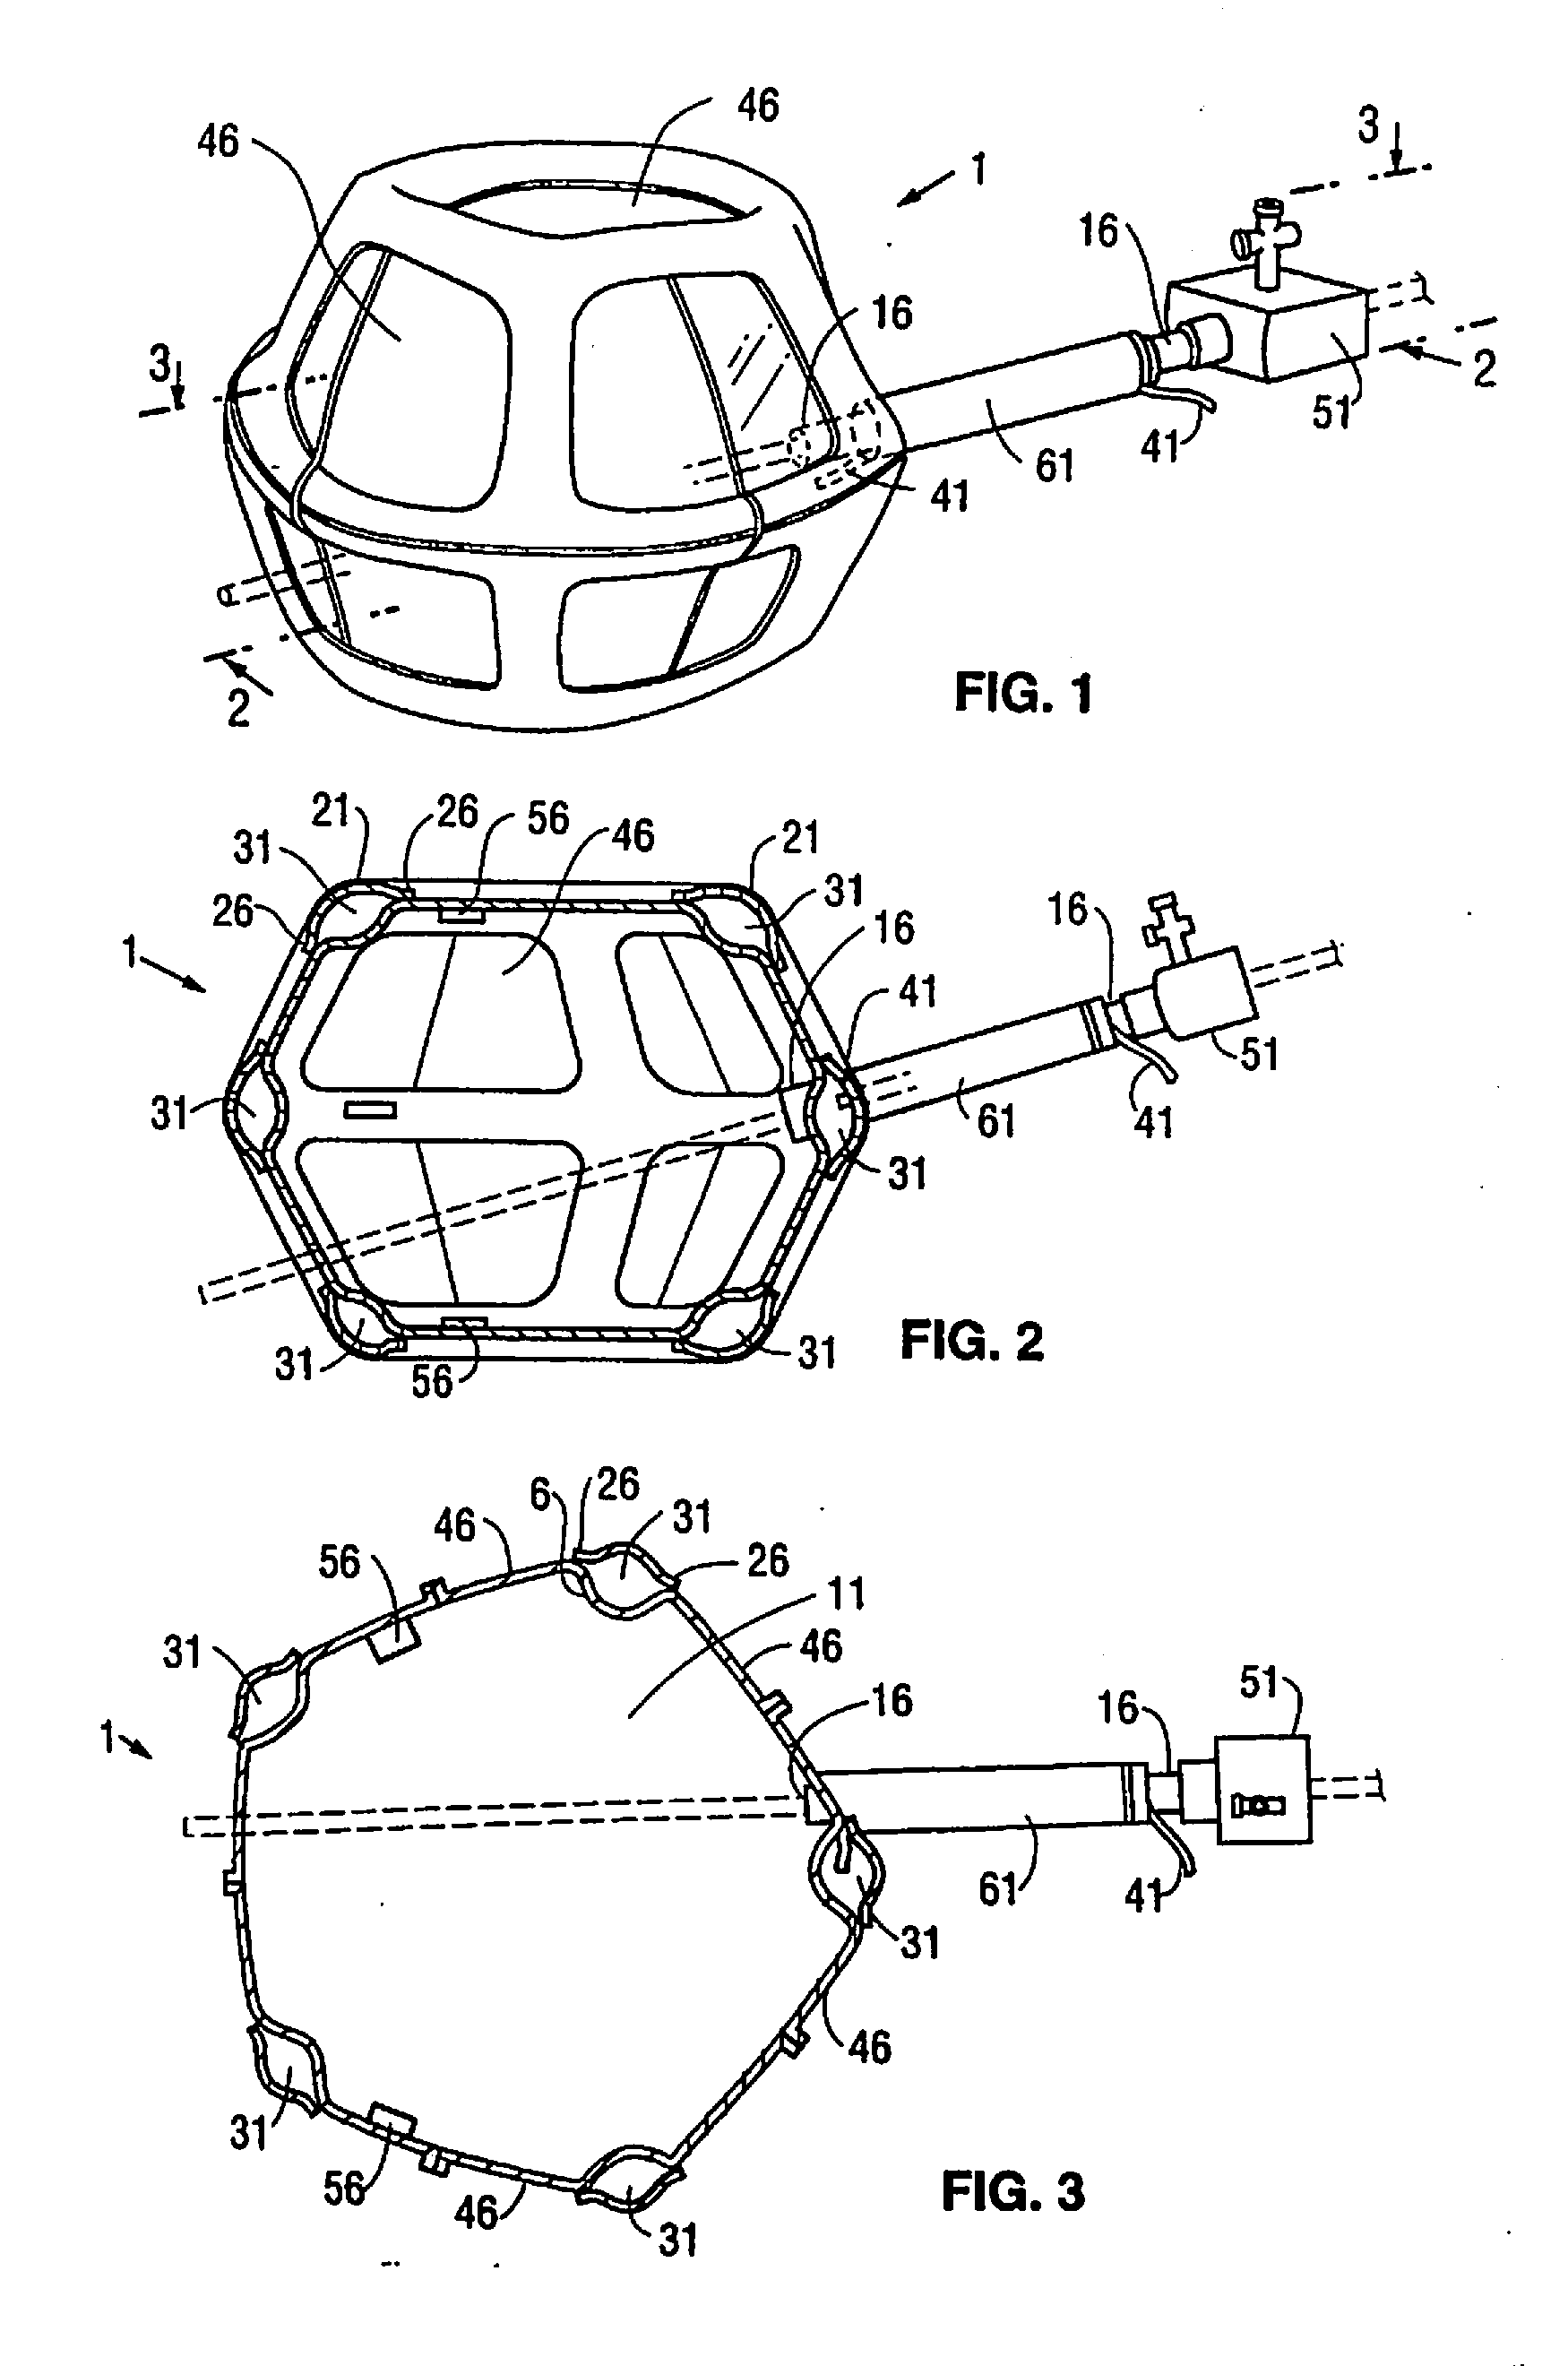 Endoscopic inflatable retraction device, method of using, and method of making